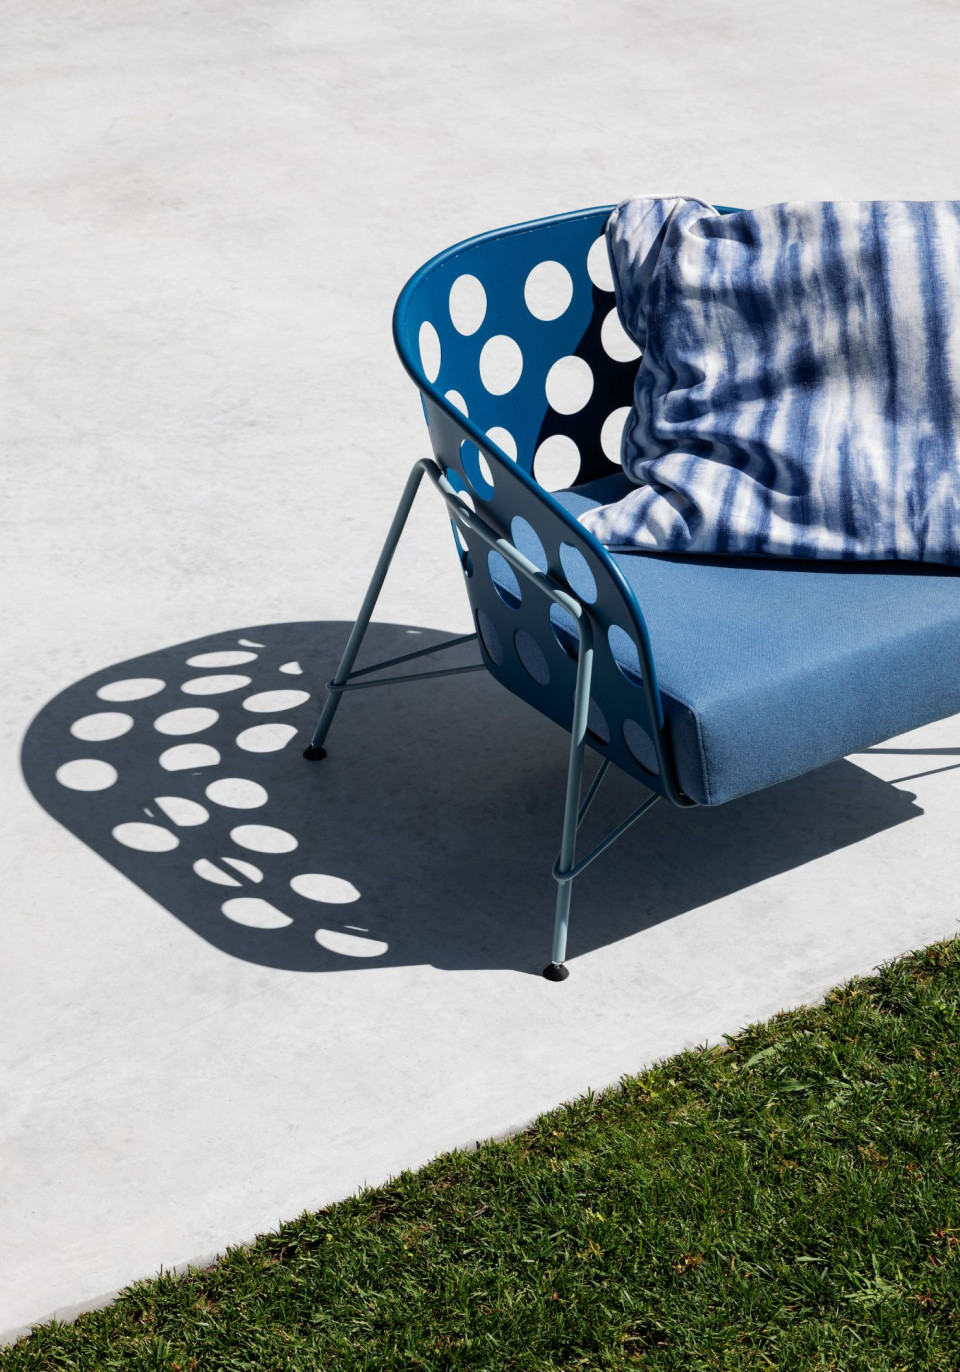 Bolle collection design Paola Navone